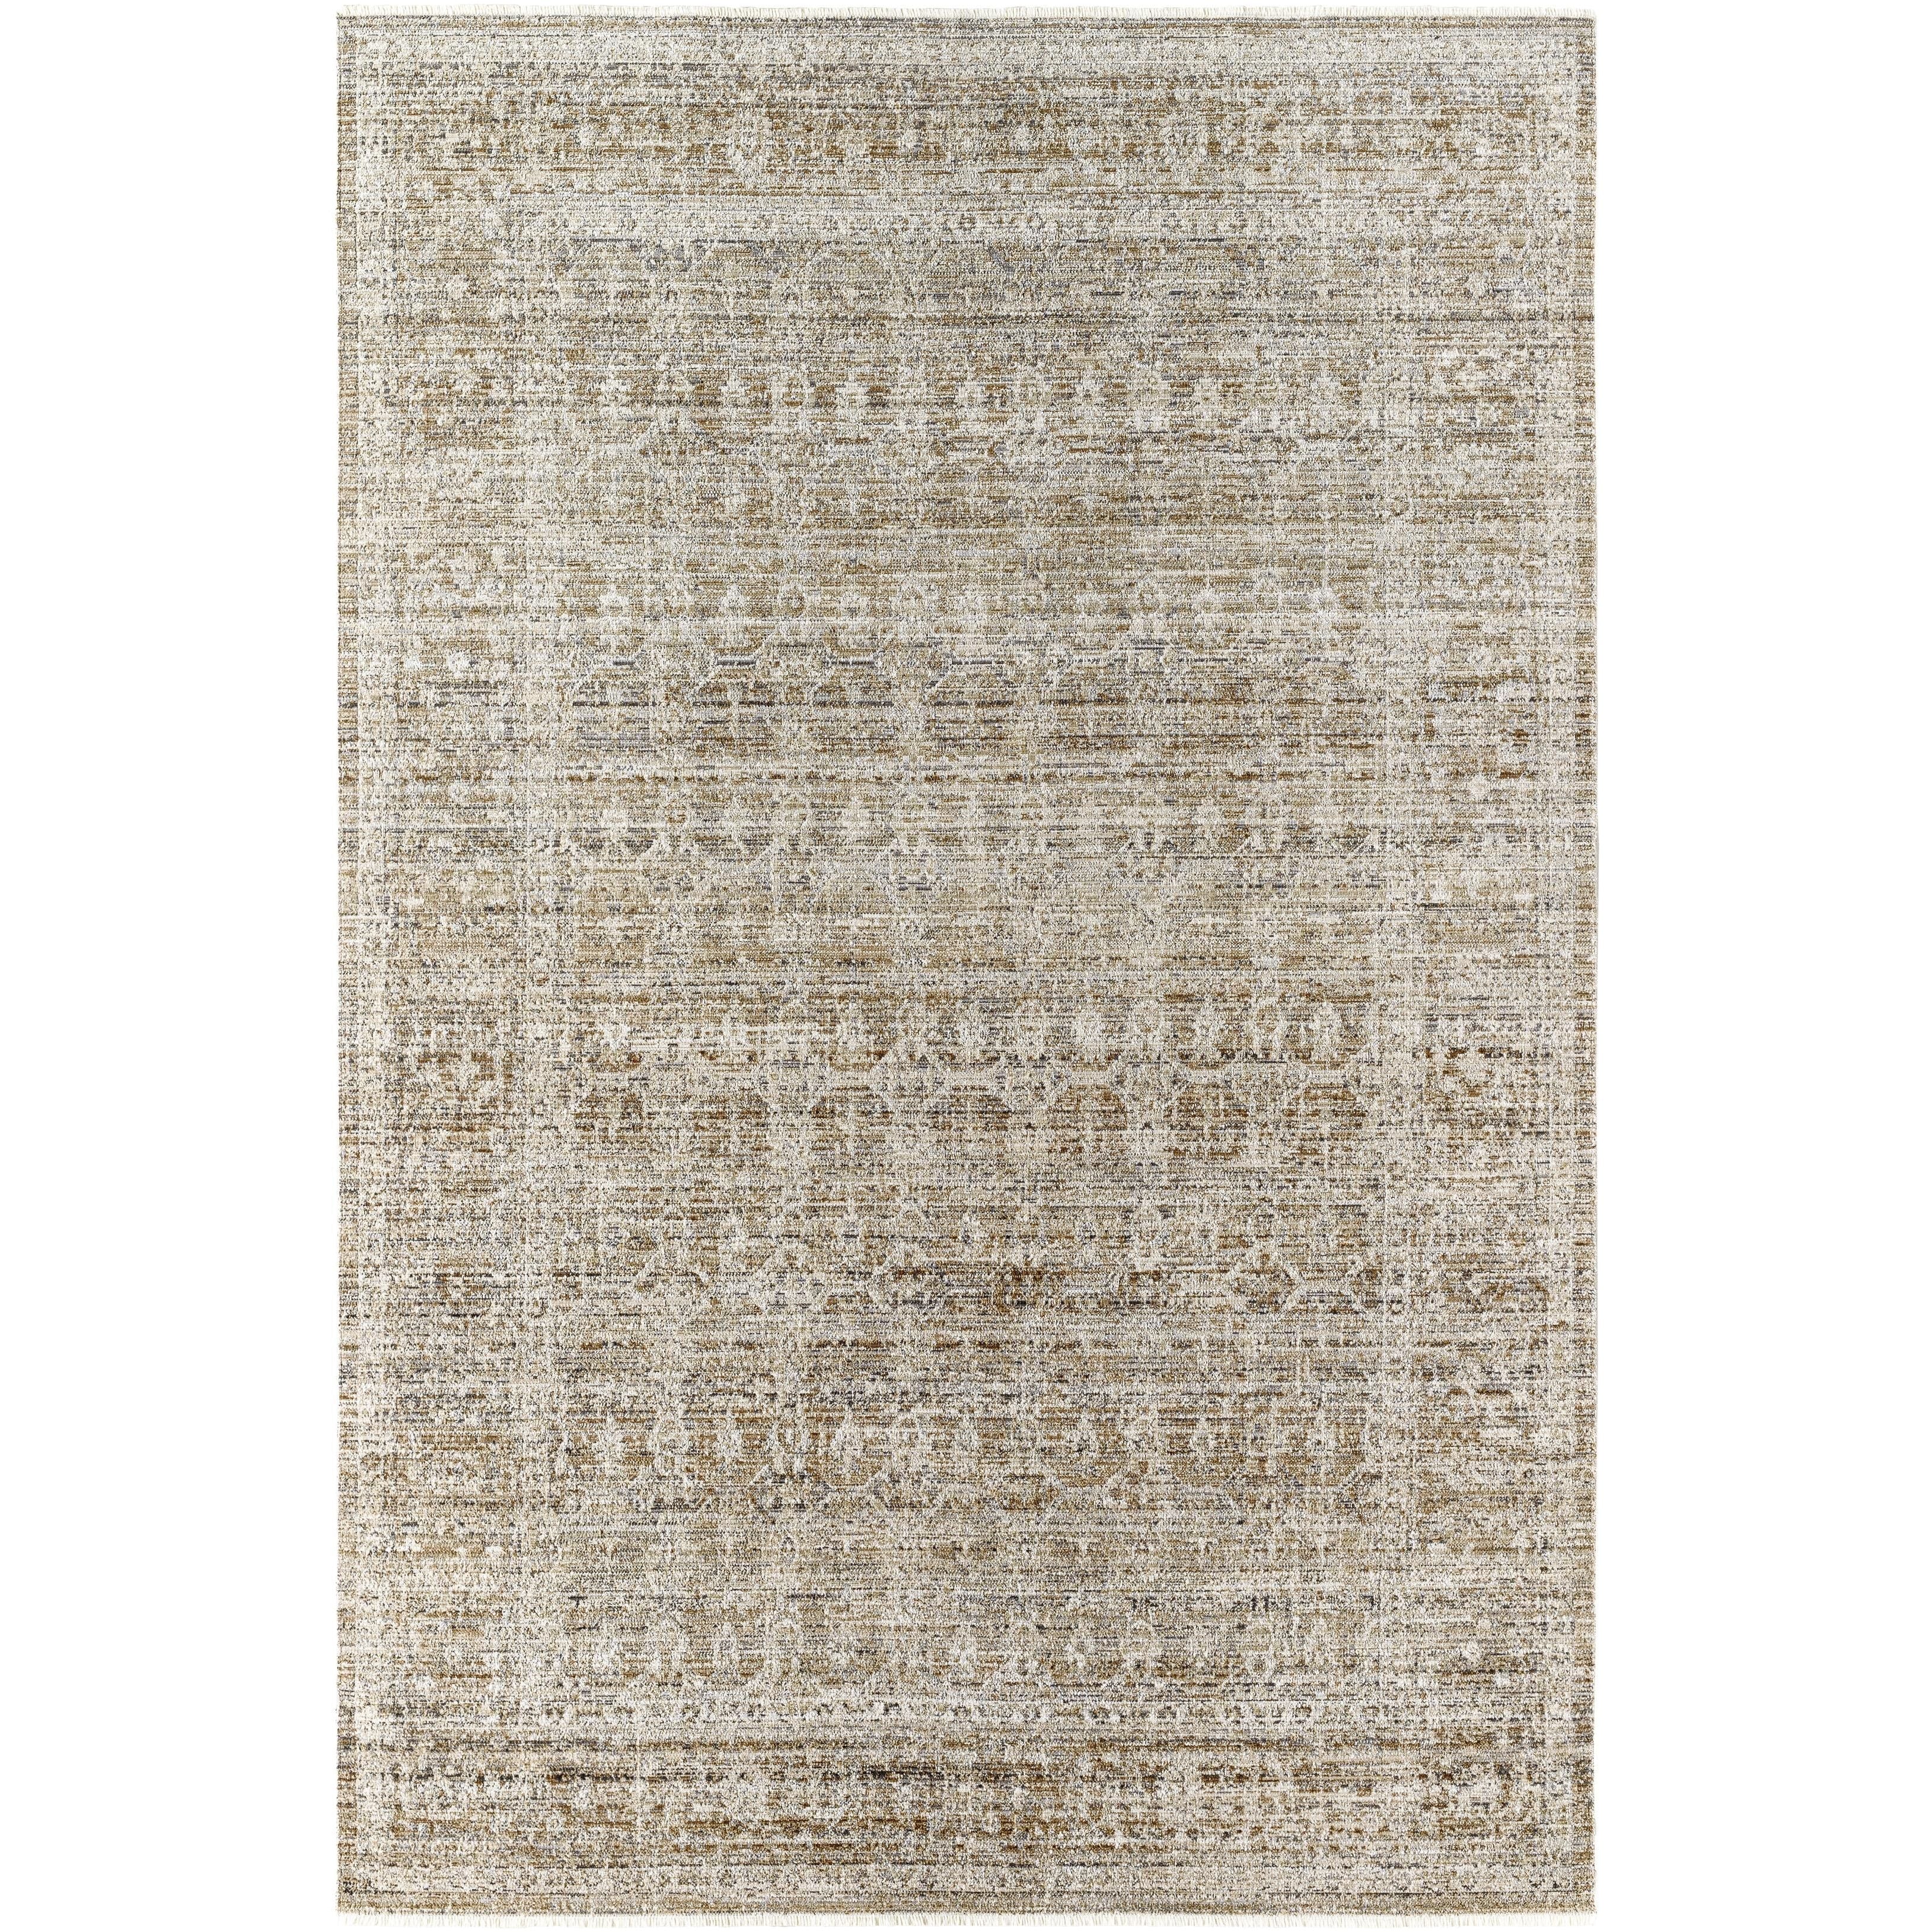 This exquisite Margaret area rug is the perfect addition to any home. The special collaboration piece from Becki Owens x Surya brings together beautiful vintage inspired style and modern craftsmanship. Amethyst Home provides interior design, new home construction design consulting, vintage area rugs, and lighting in the Nashville metro area.